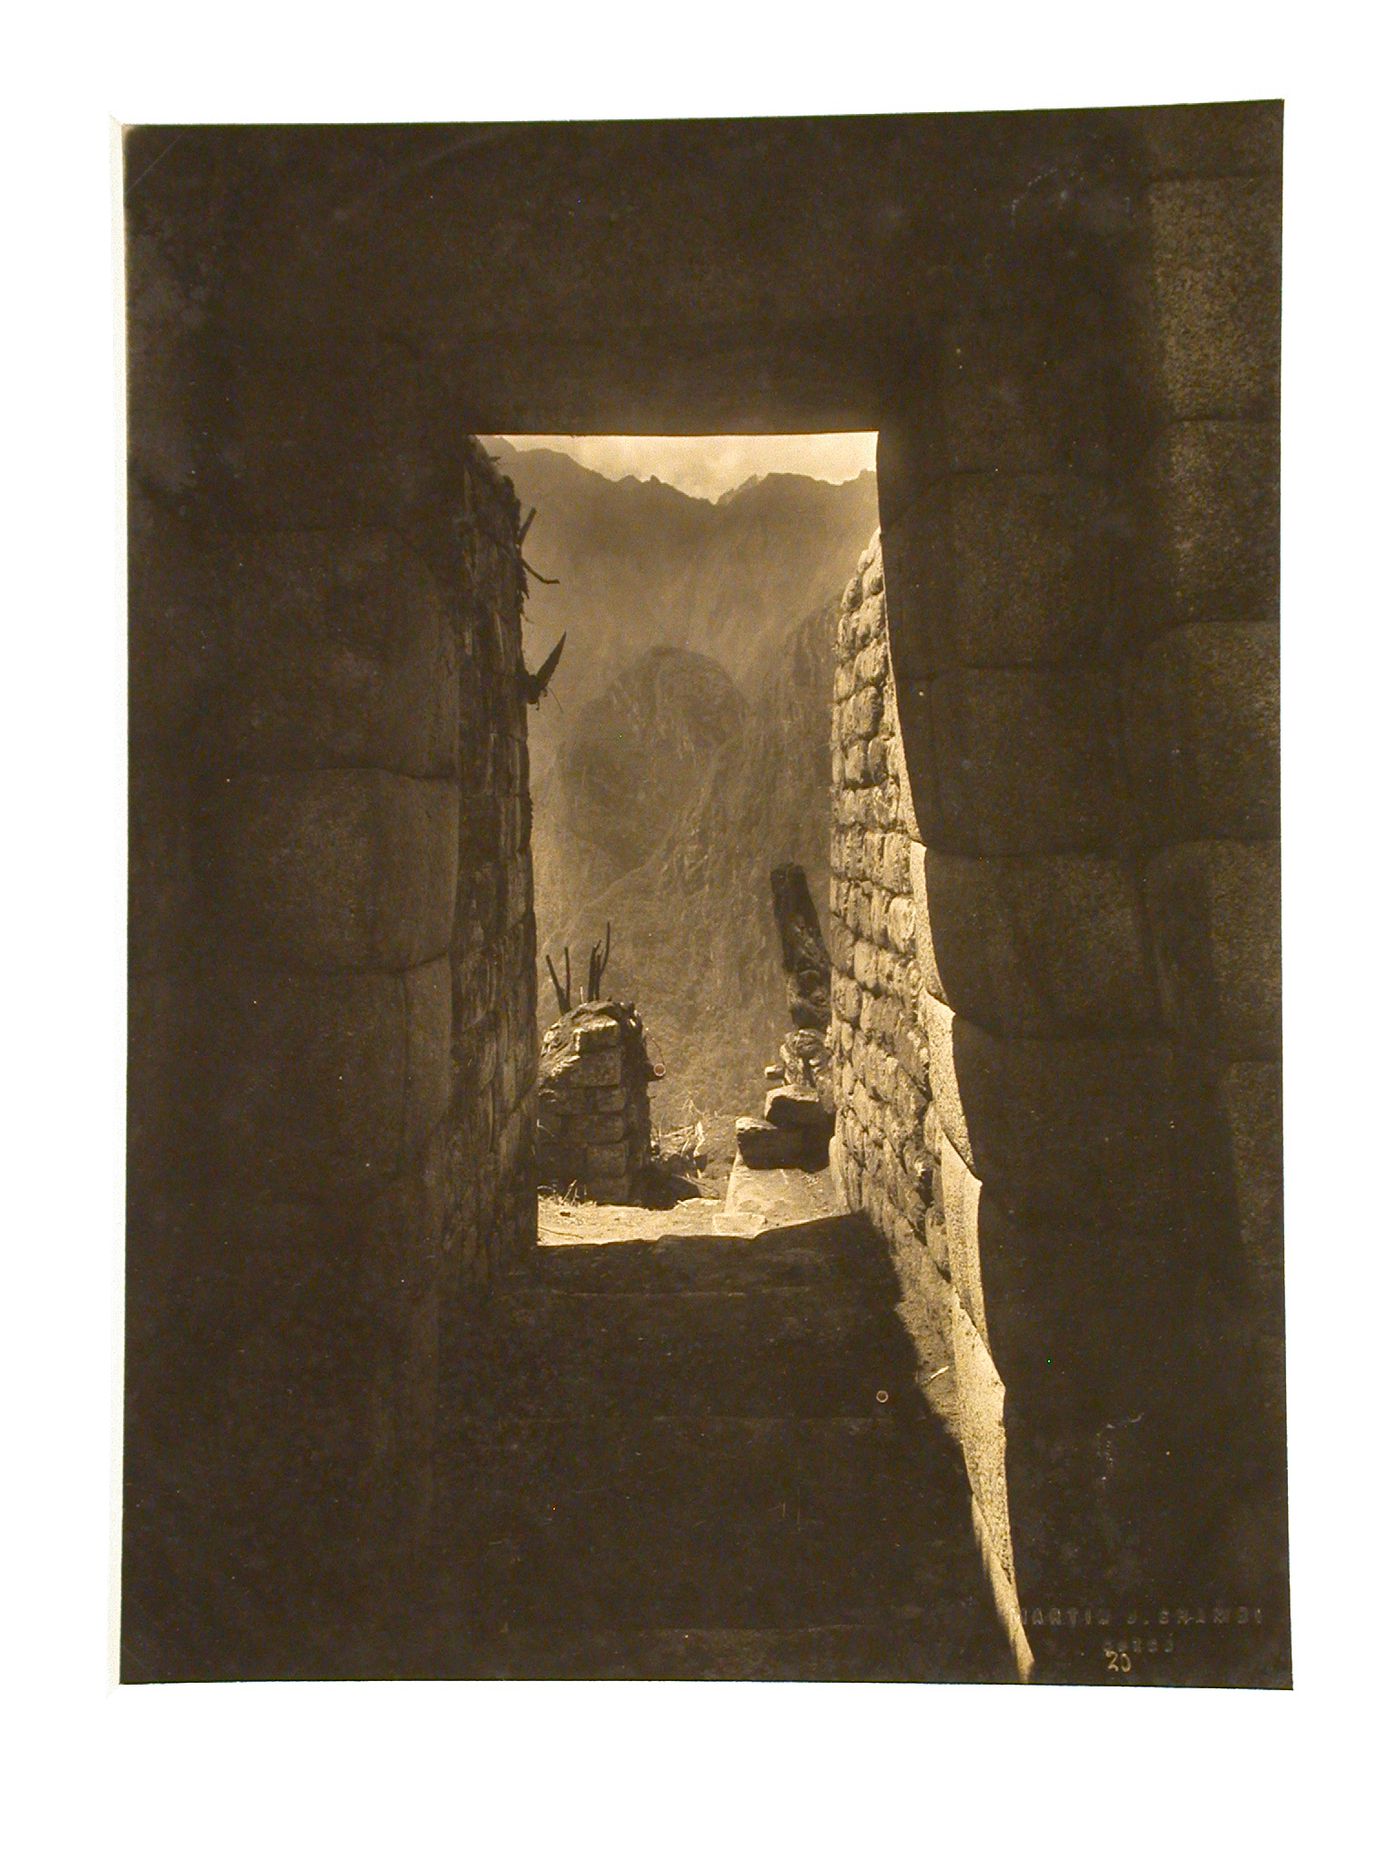 View of an entrance and alley beside the House of Ñusta [princess], Machu Picchu, Peru